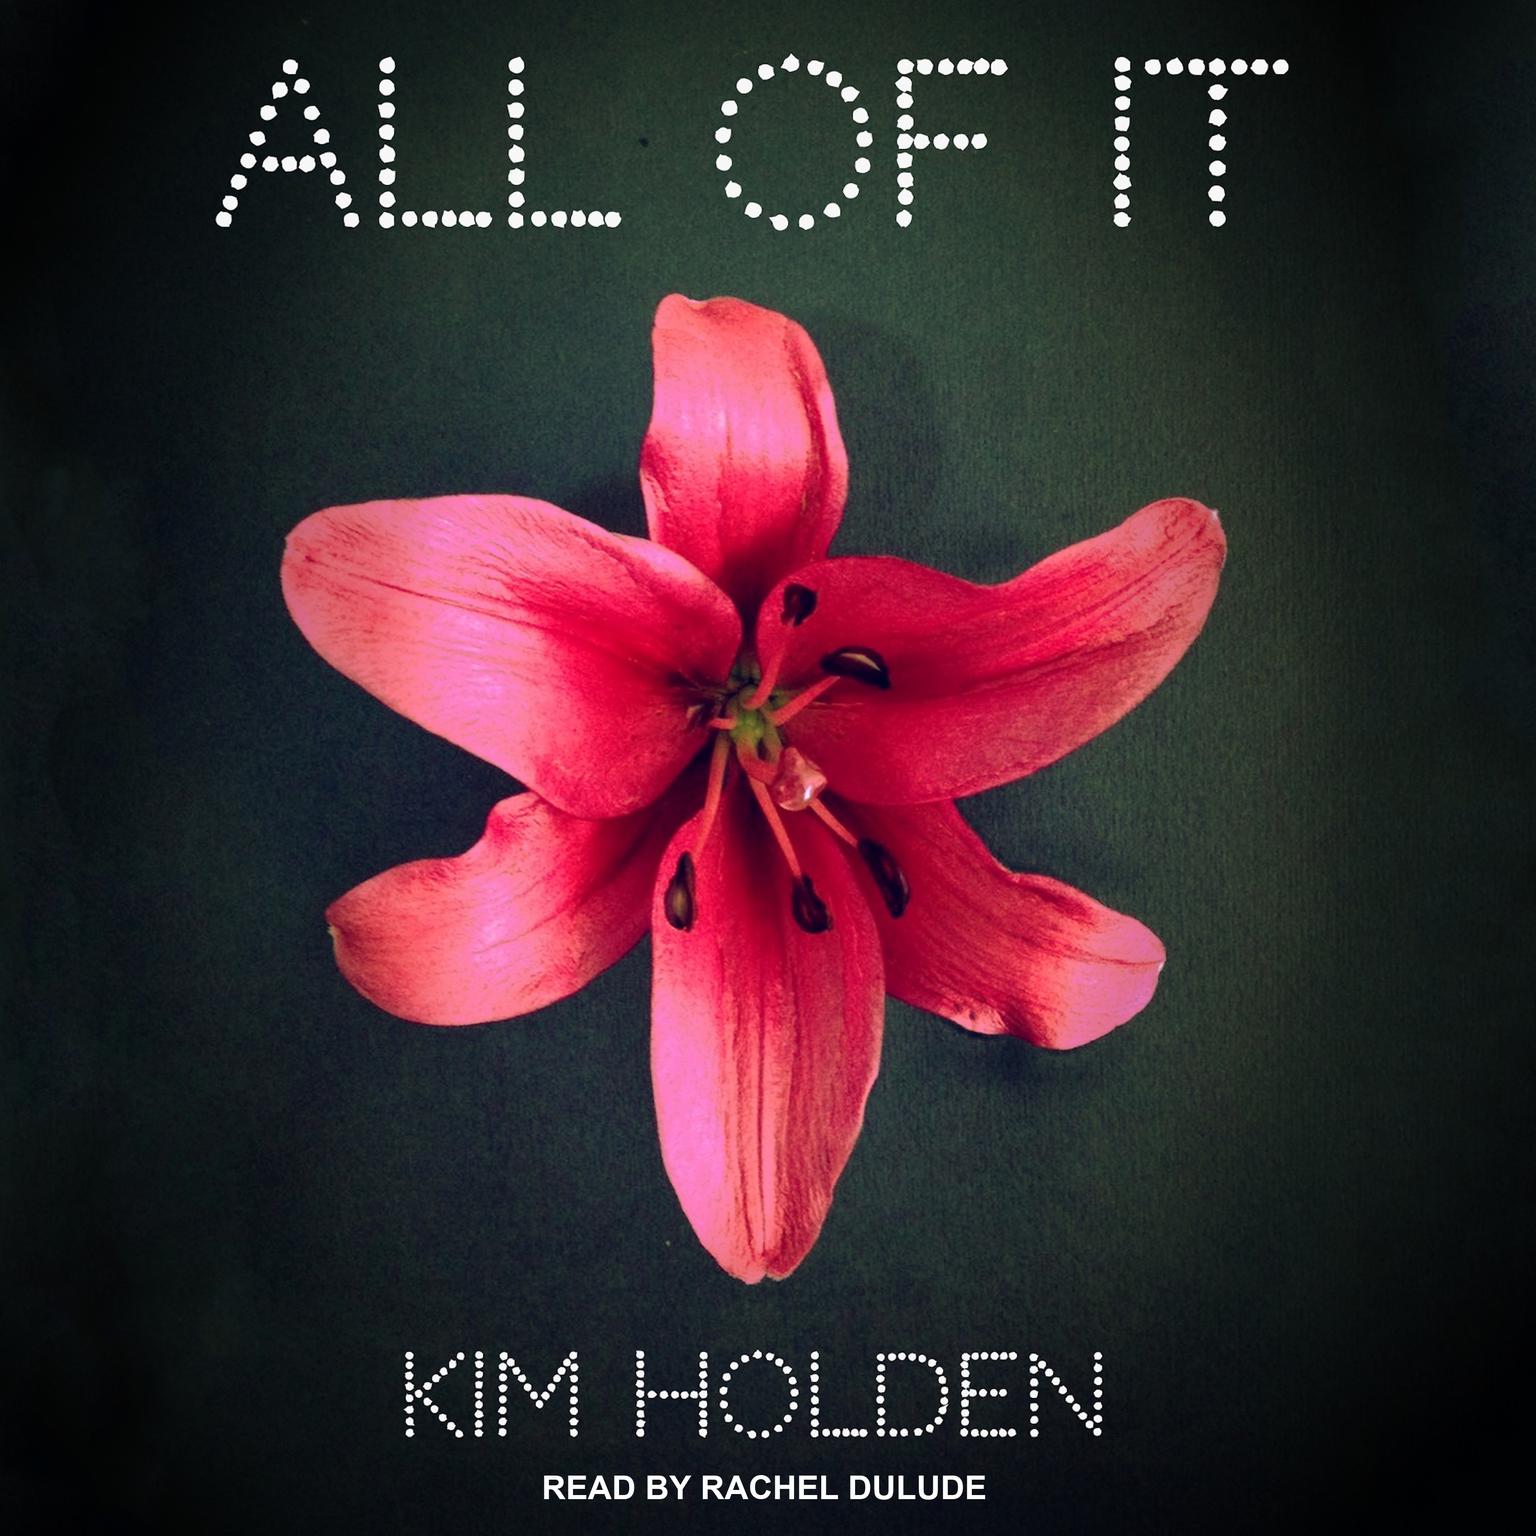 All of It Audiobook, by Kim Holden